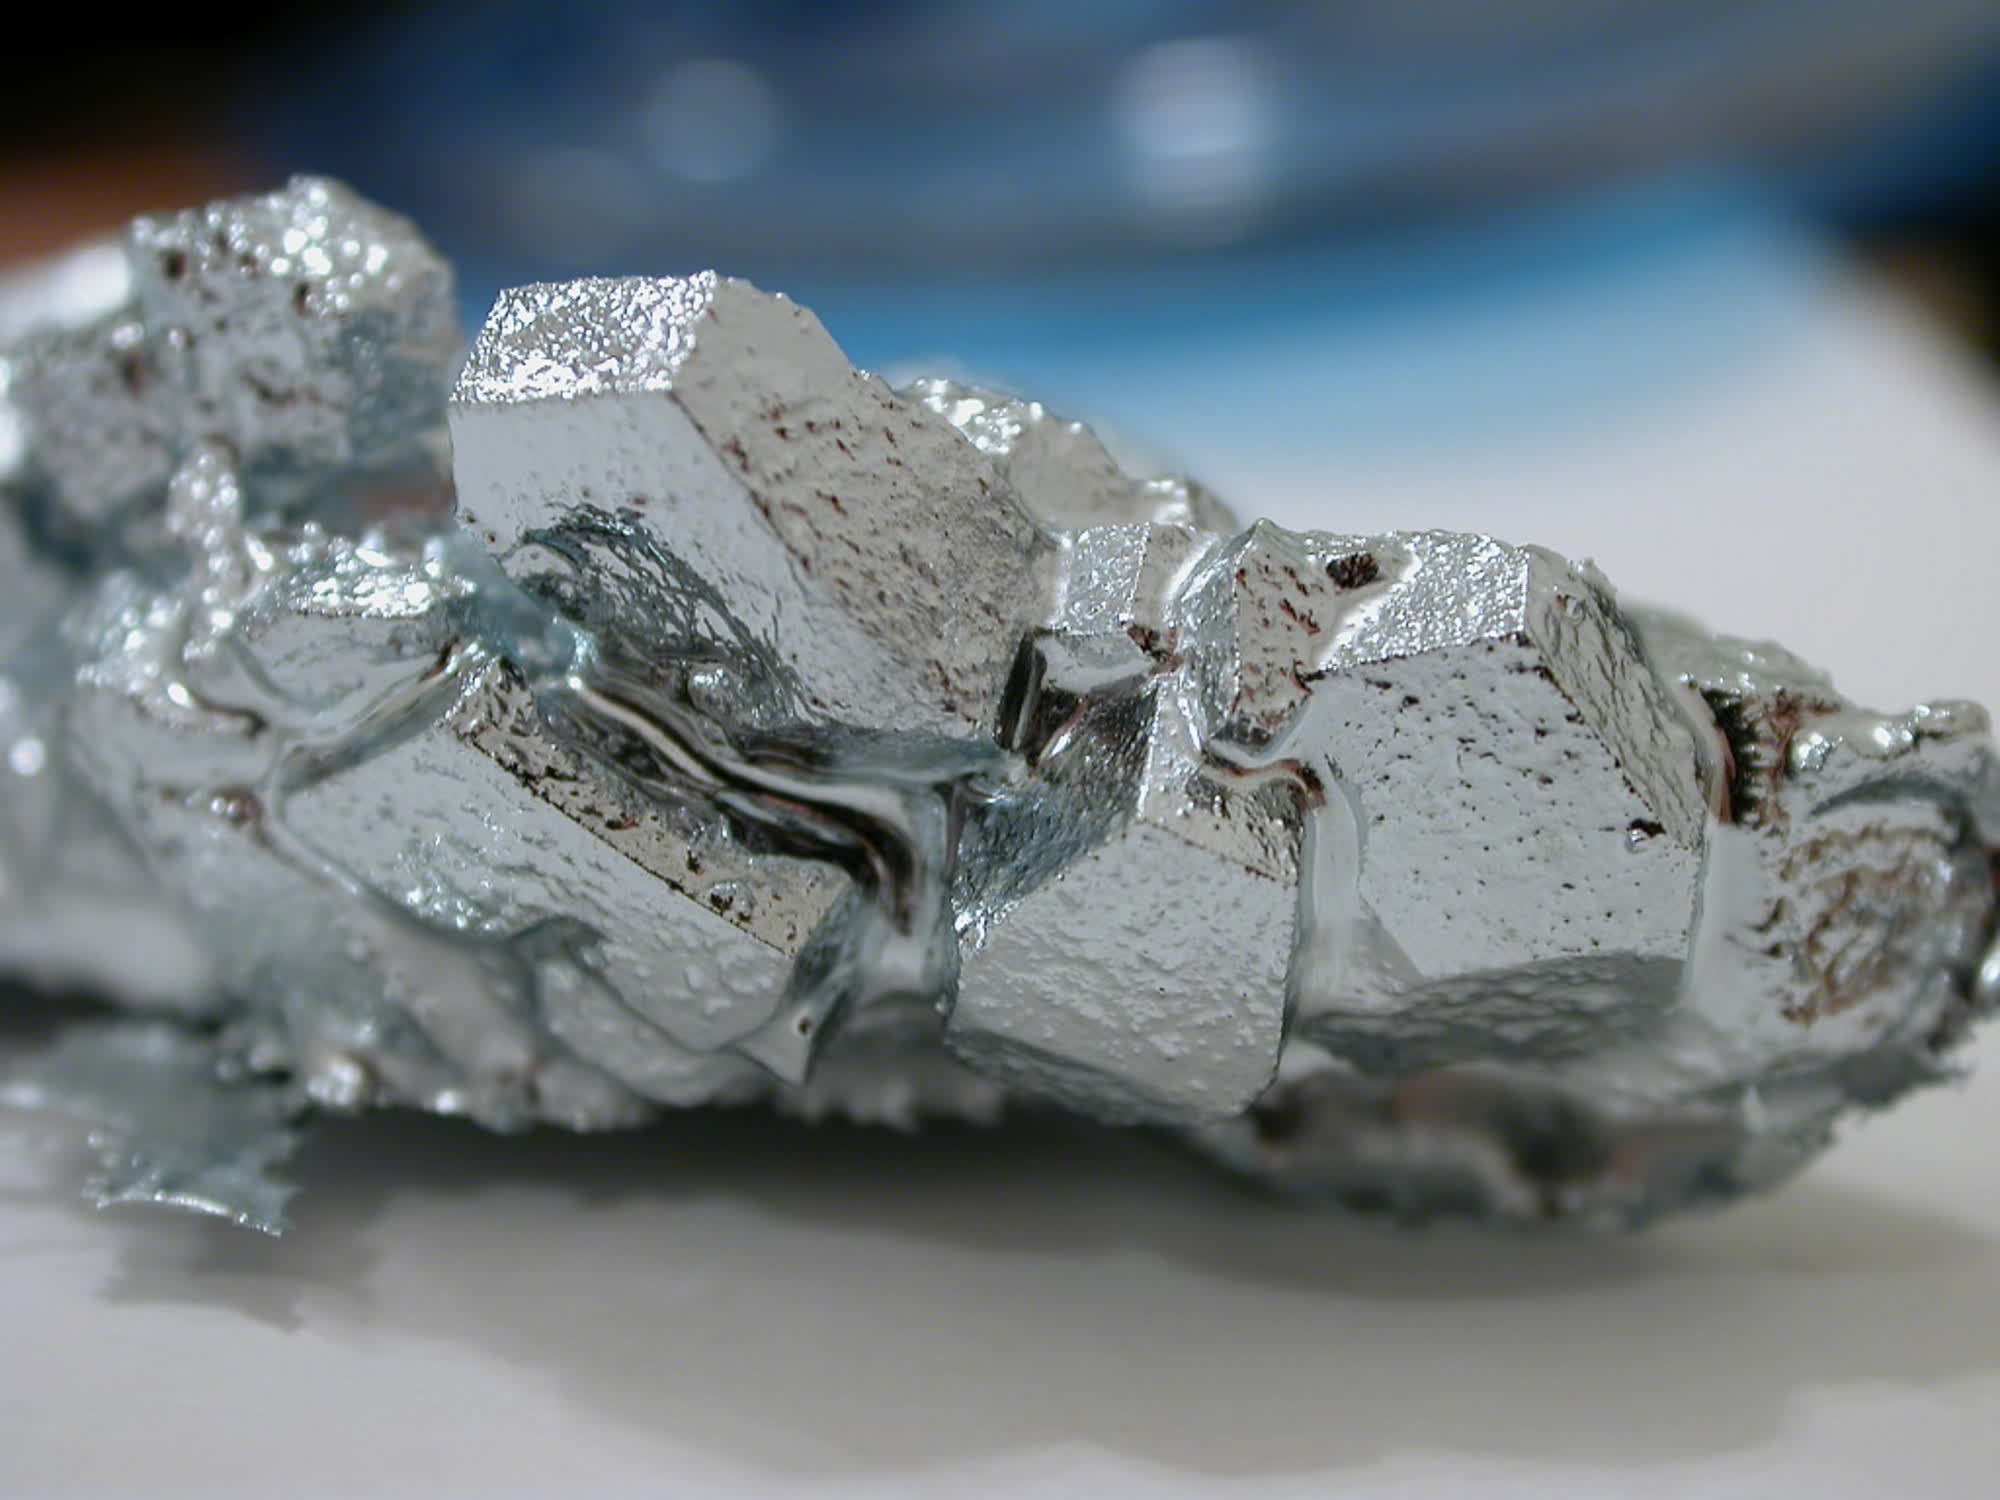 China starts restricting exports of germanium and gallium for tech product manufacturing